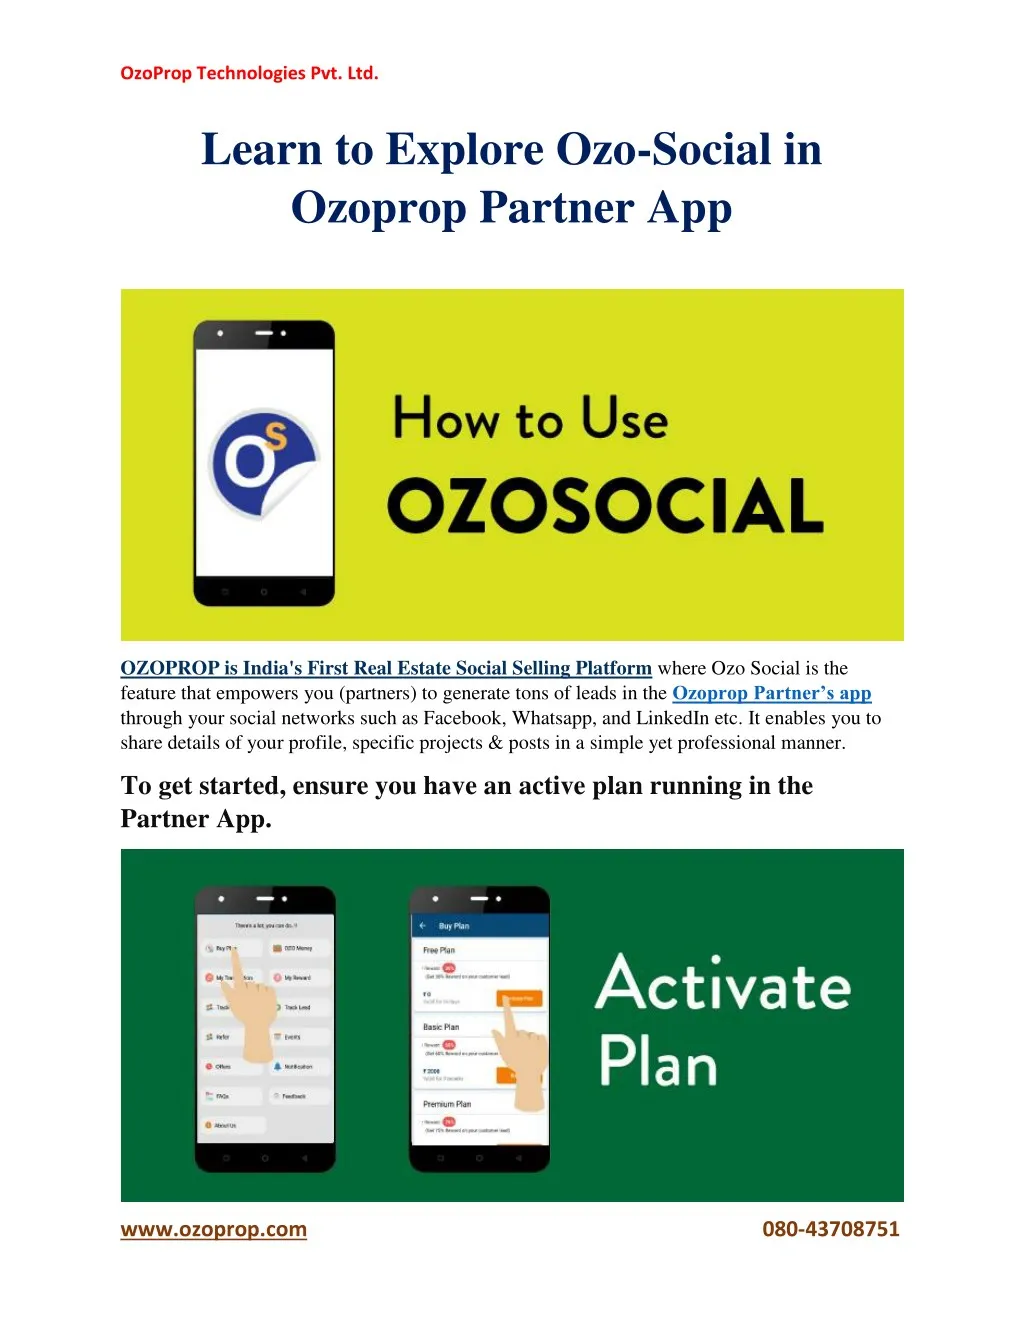 ozoprop technologies pvt ltd learn to explore